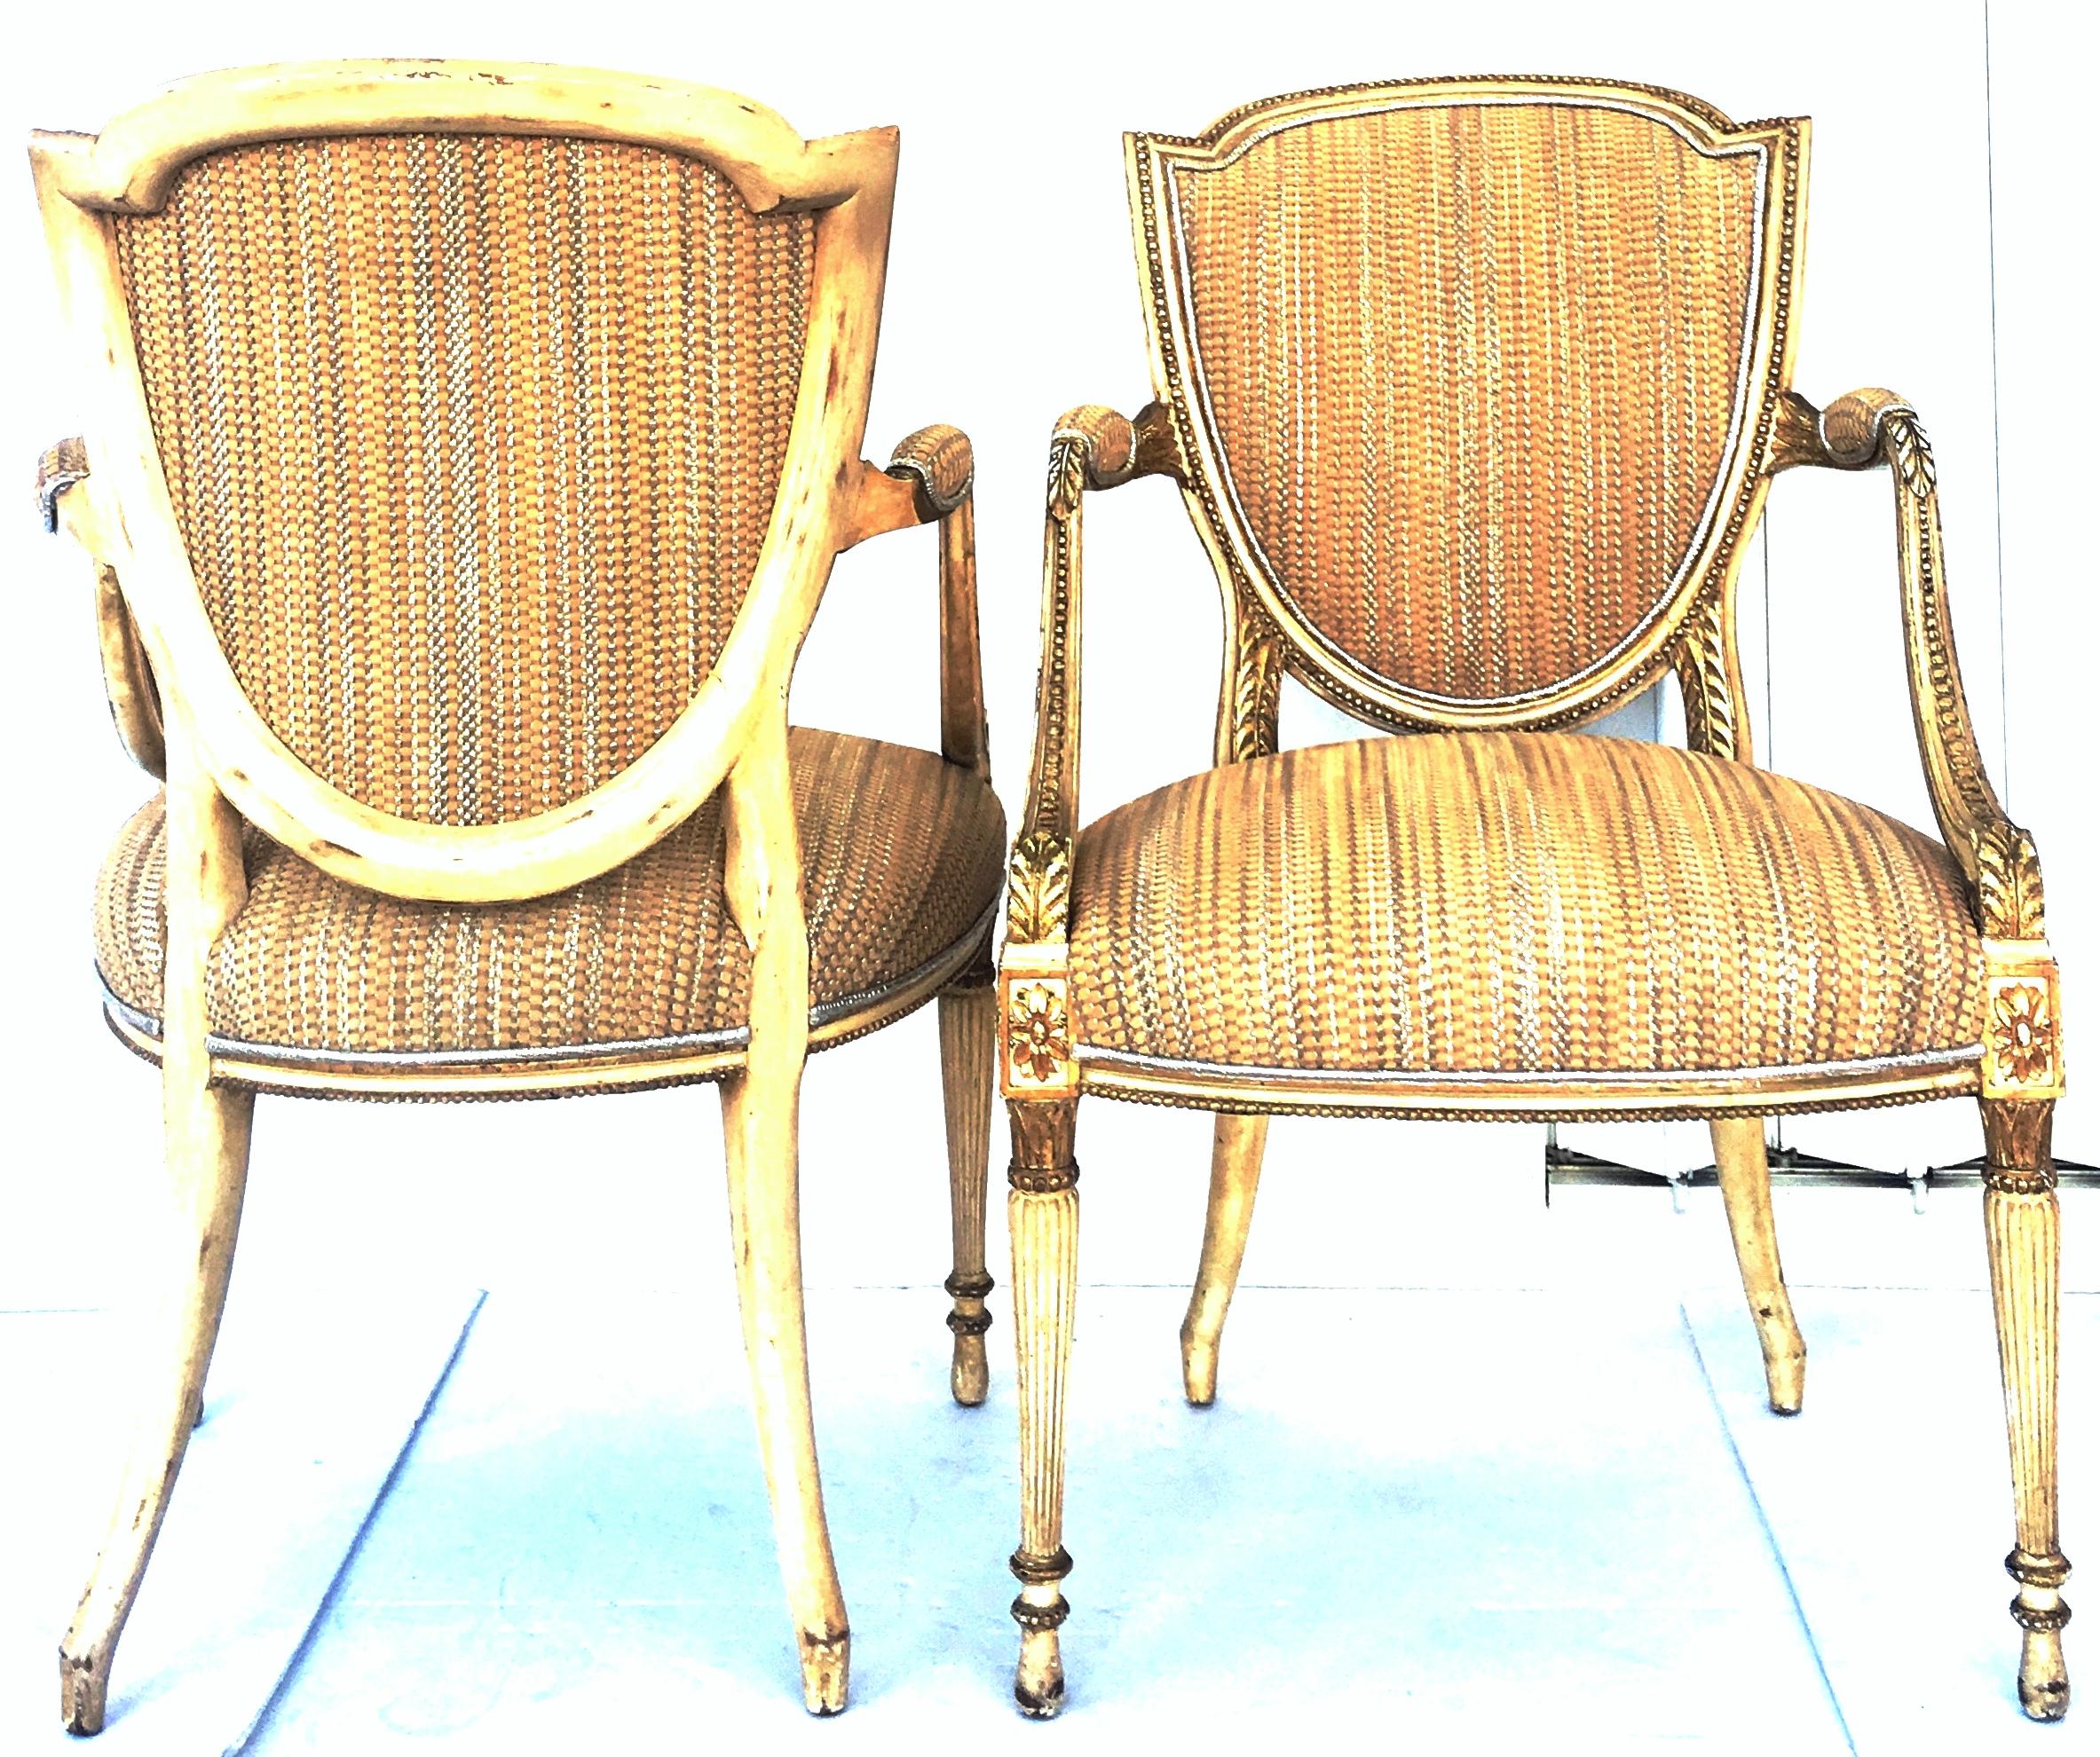 Hand-Painted 18th Century Pair Of Fine French Louis XVI Shield Gilt Wood & Leather Armchairs